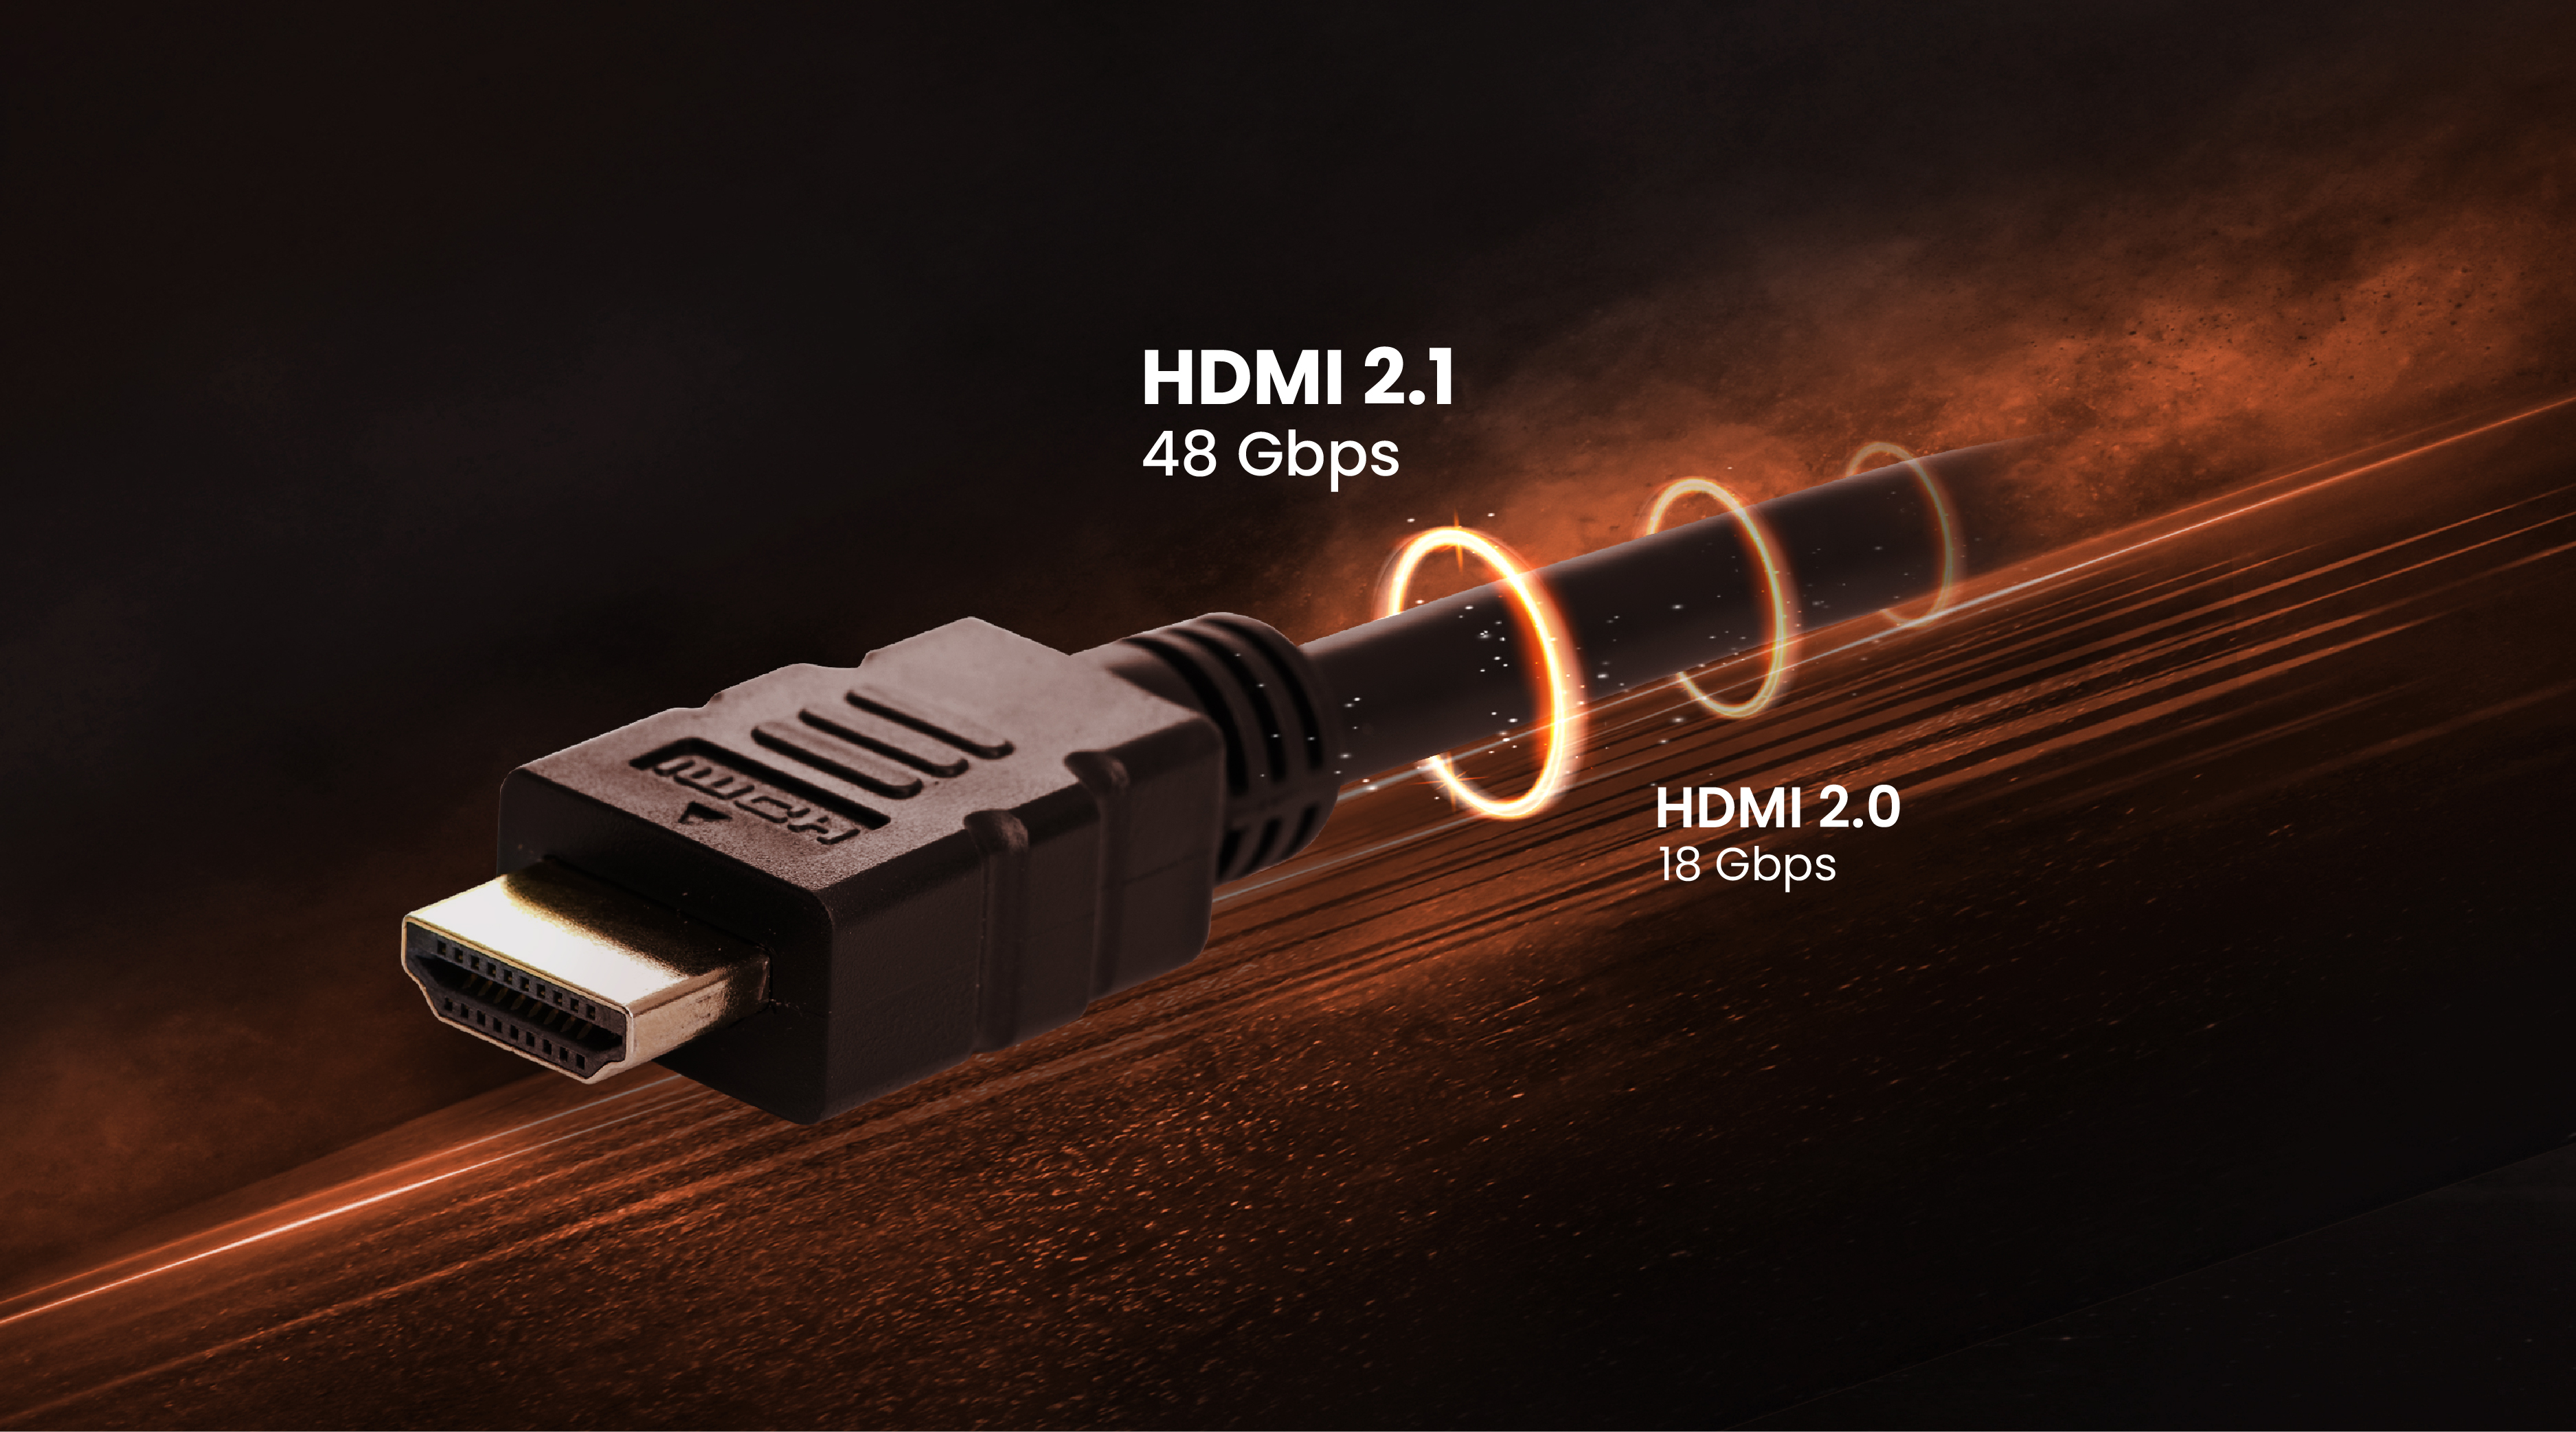 When Do I Really Need HDMI 2.1 or Is HDMI 2.0 Enough? | BenQ